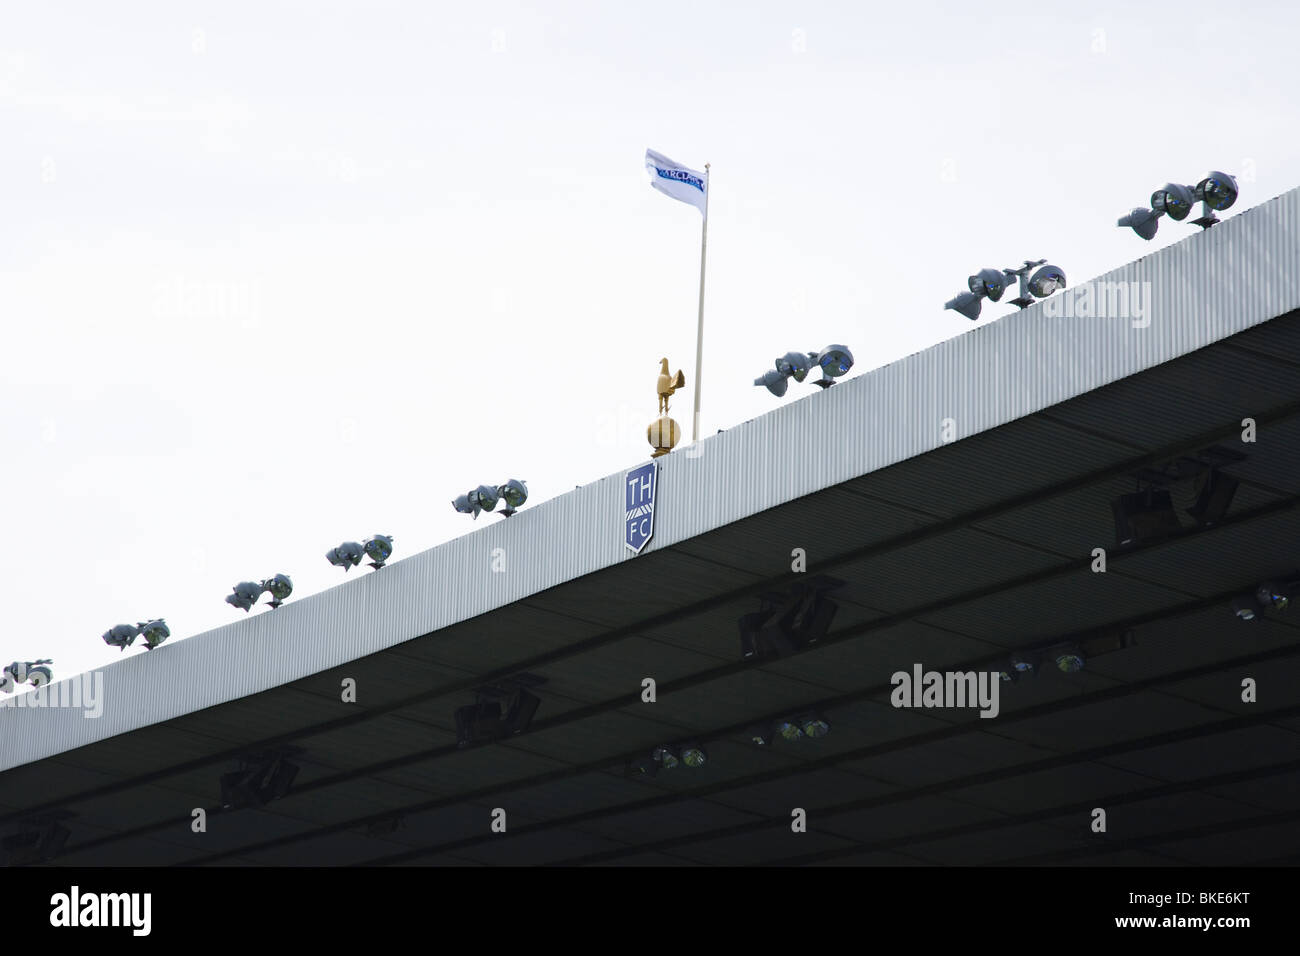 Tottenham hotspurs football stadium famous west stand with gold Gamecock logo on the stands roof Stock Photo